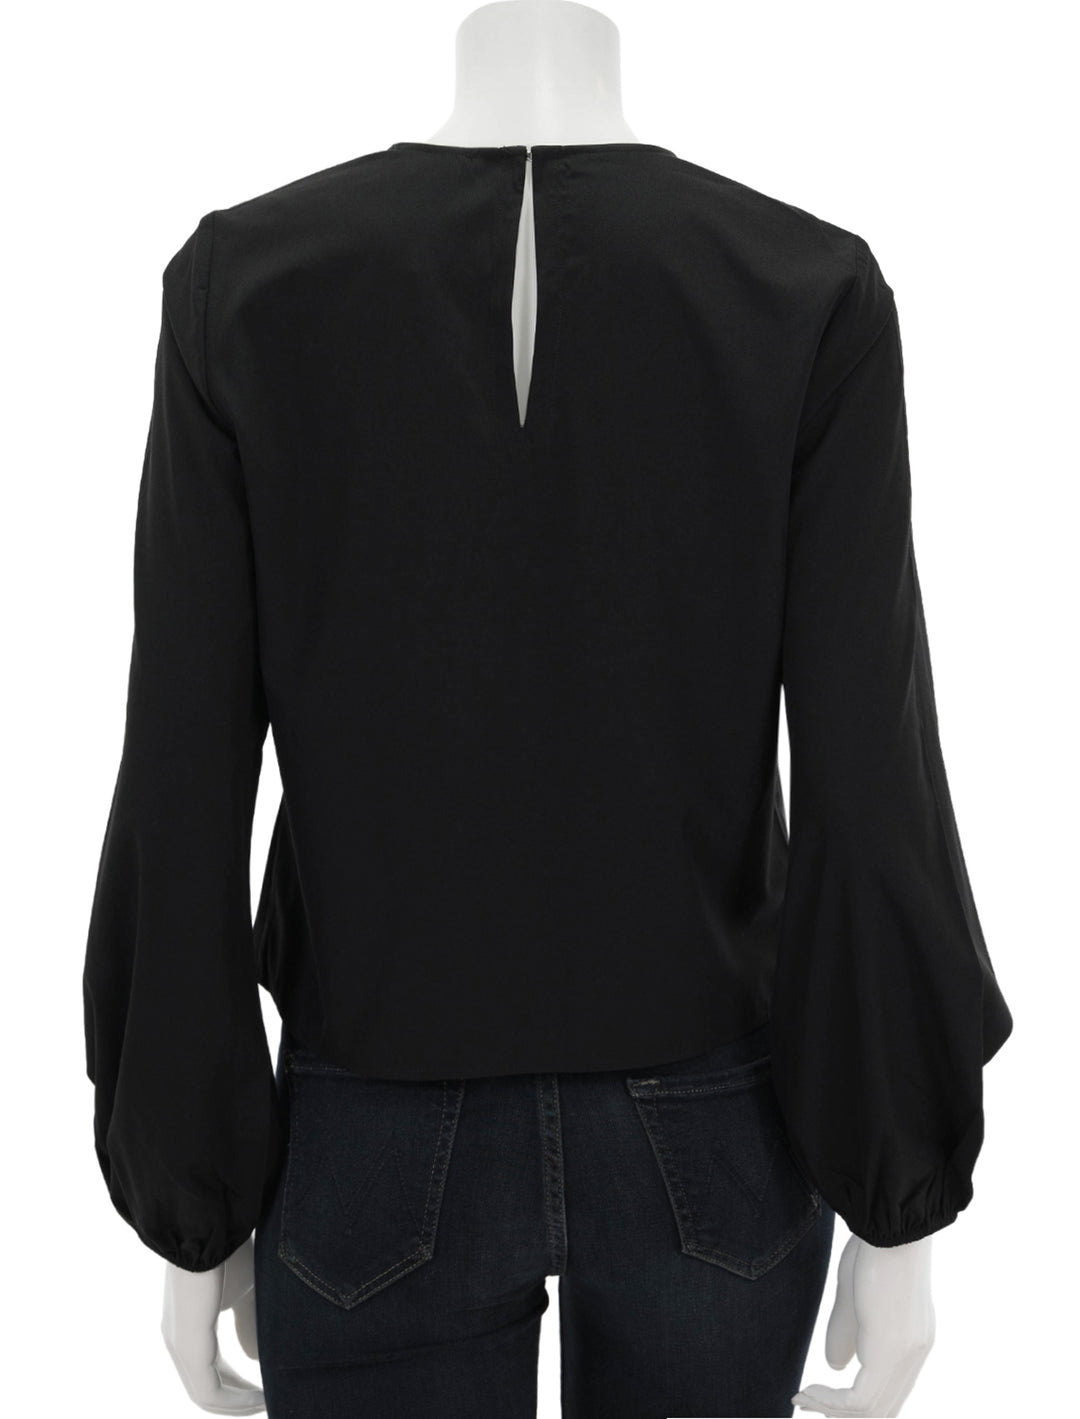 Back view of Rails' eli top in black.